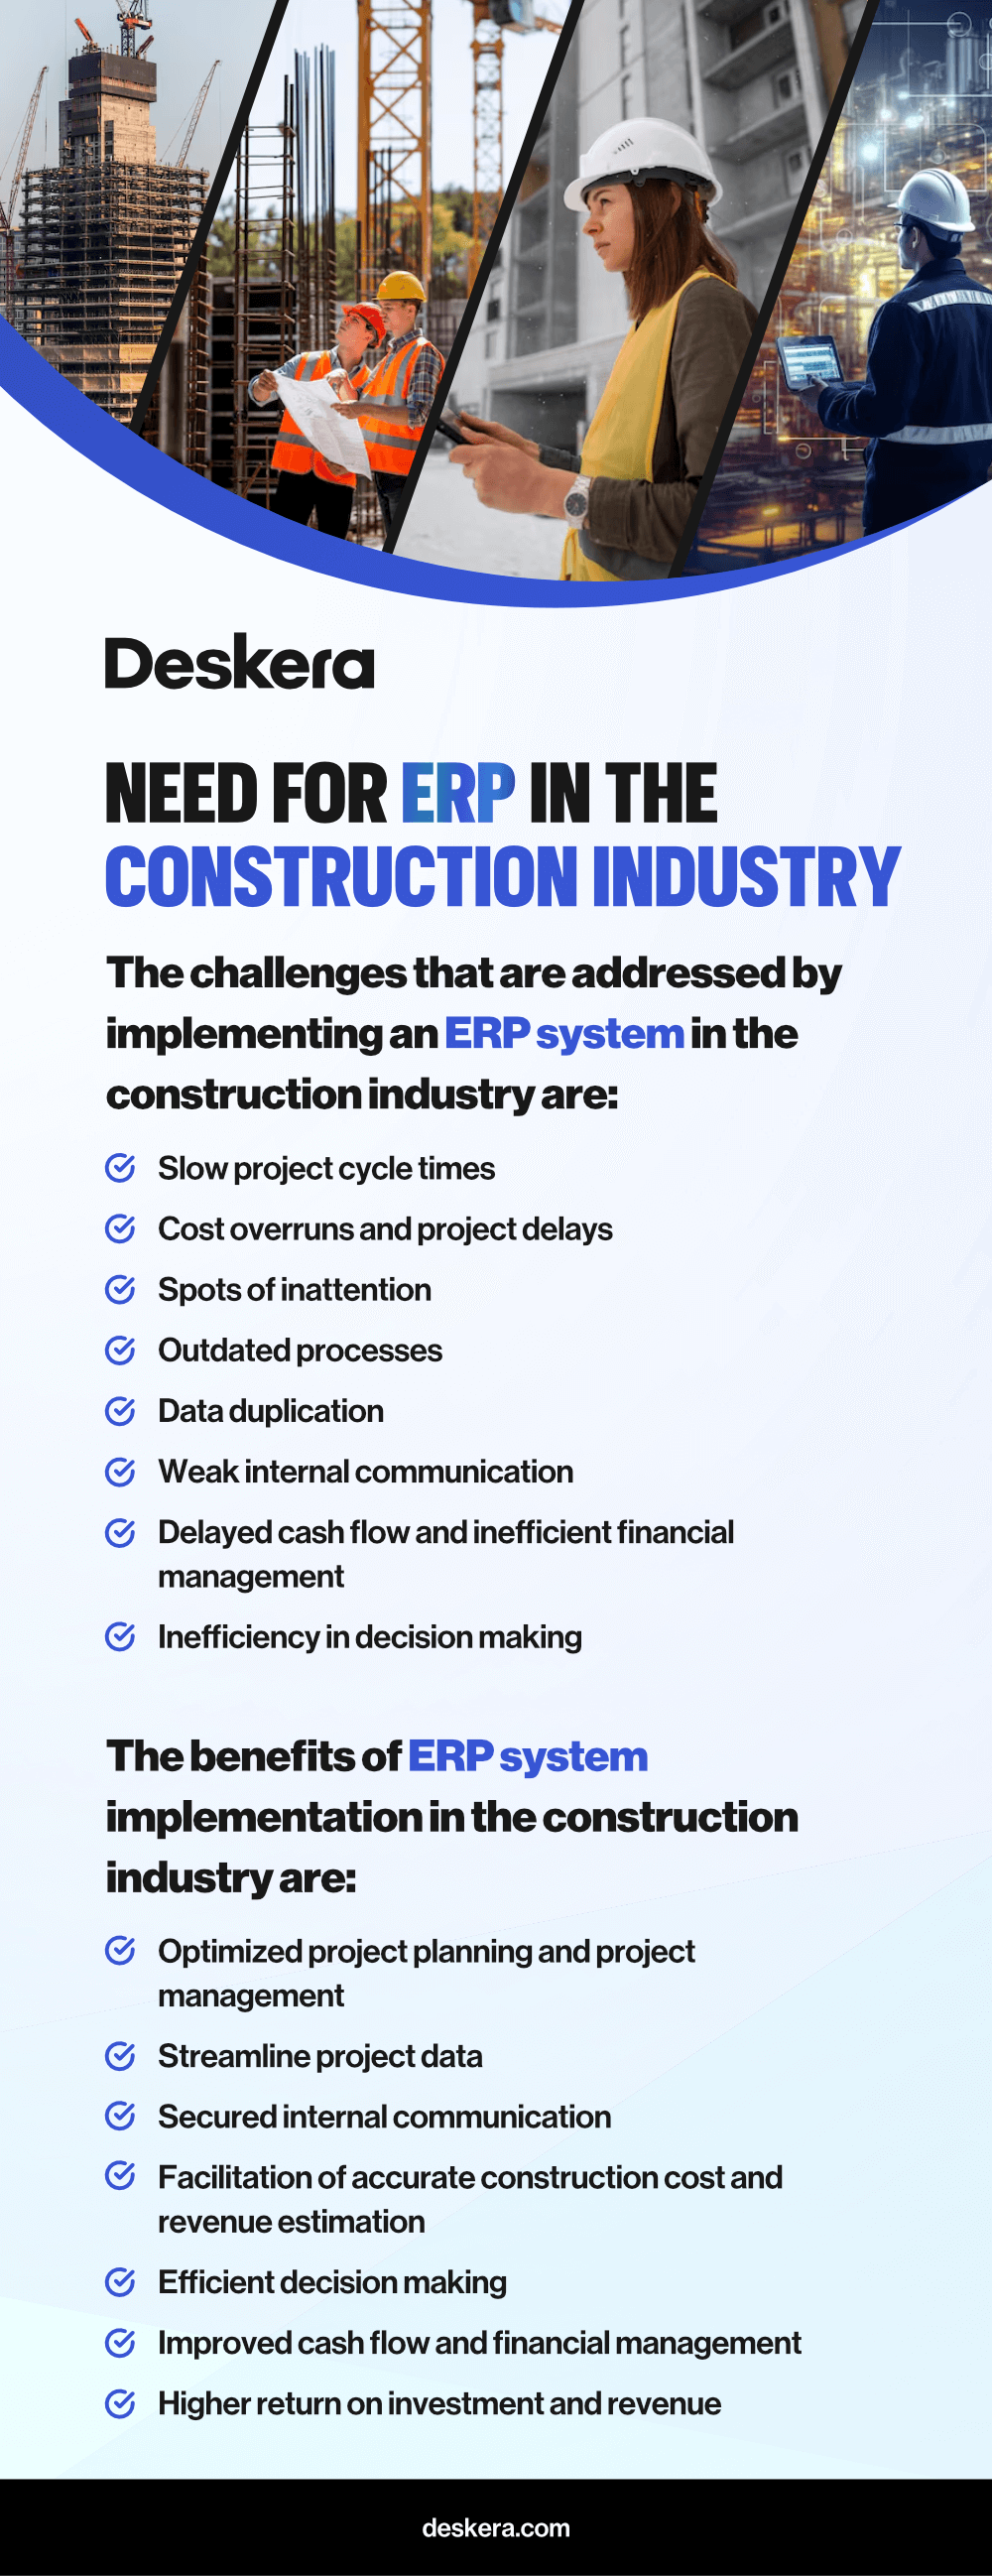 Construction ERP system helps in facing challenges like slow project cycle times, inefficiency in decision making, cost overruns and project delays, and more, giving benefits like higher return on investment and revenue, improved cash flow and financial management, streamlined project data, and more.